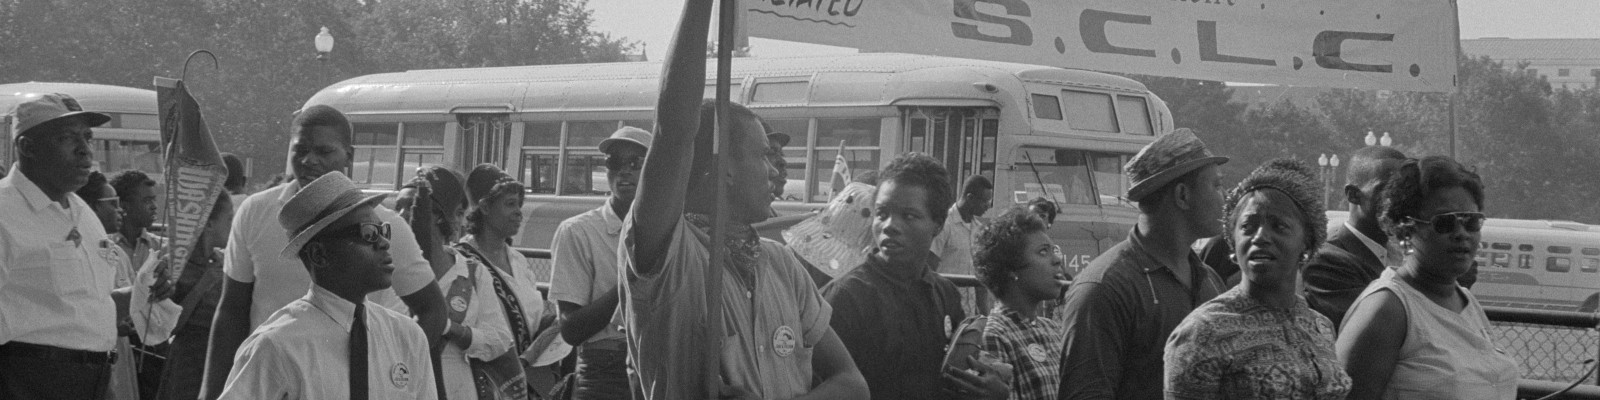 Participants in March on Washington, 1963